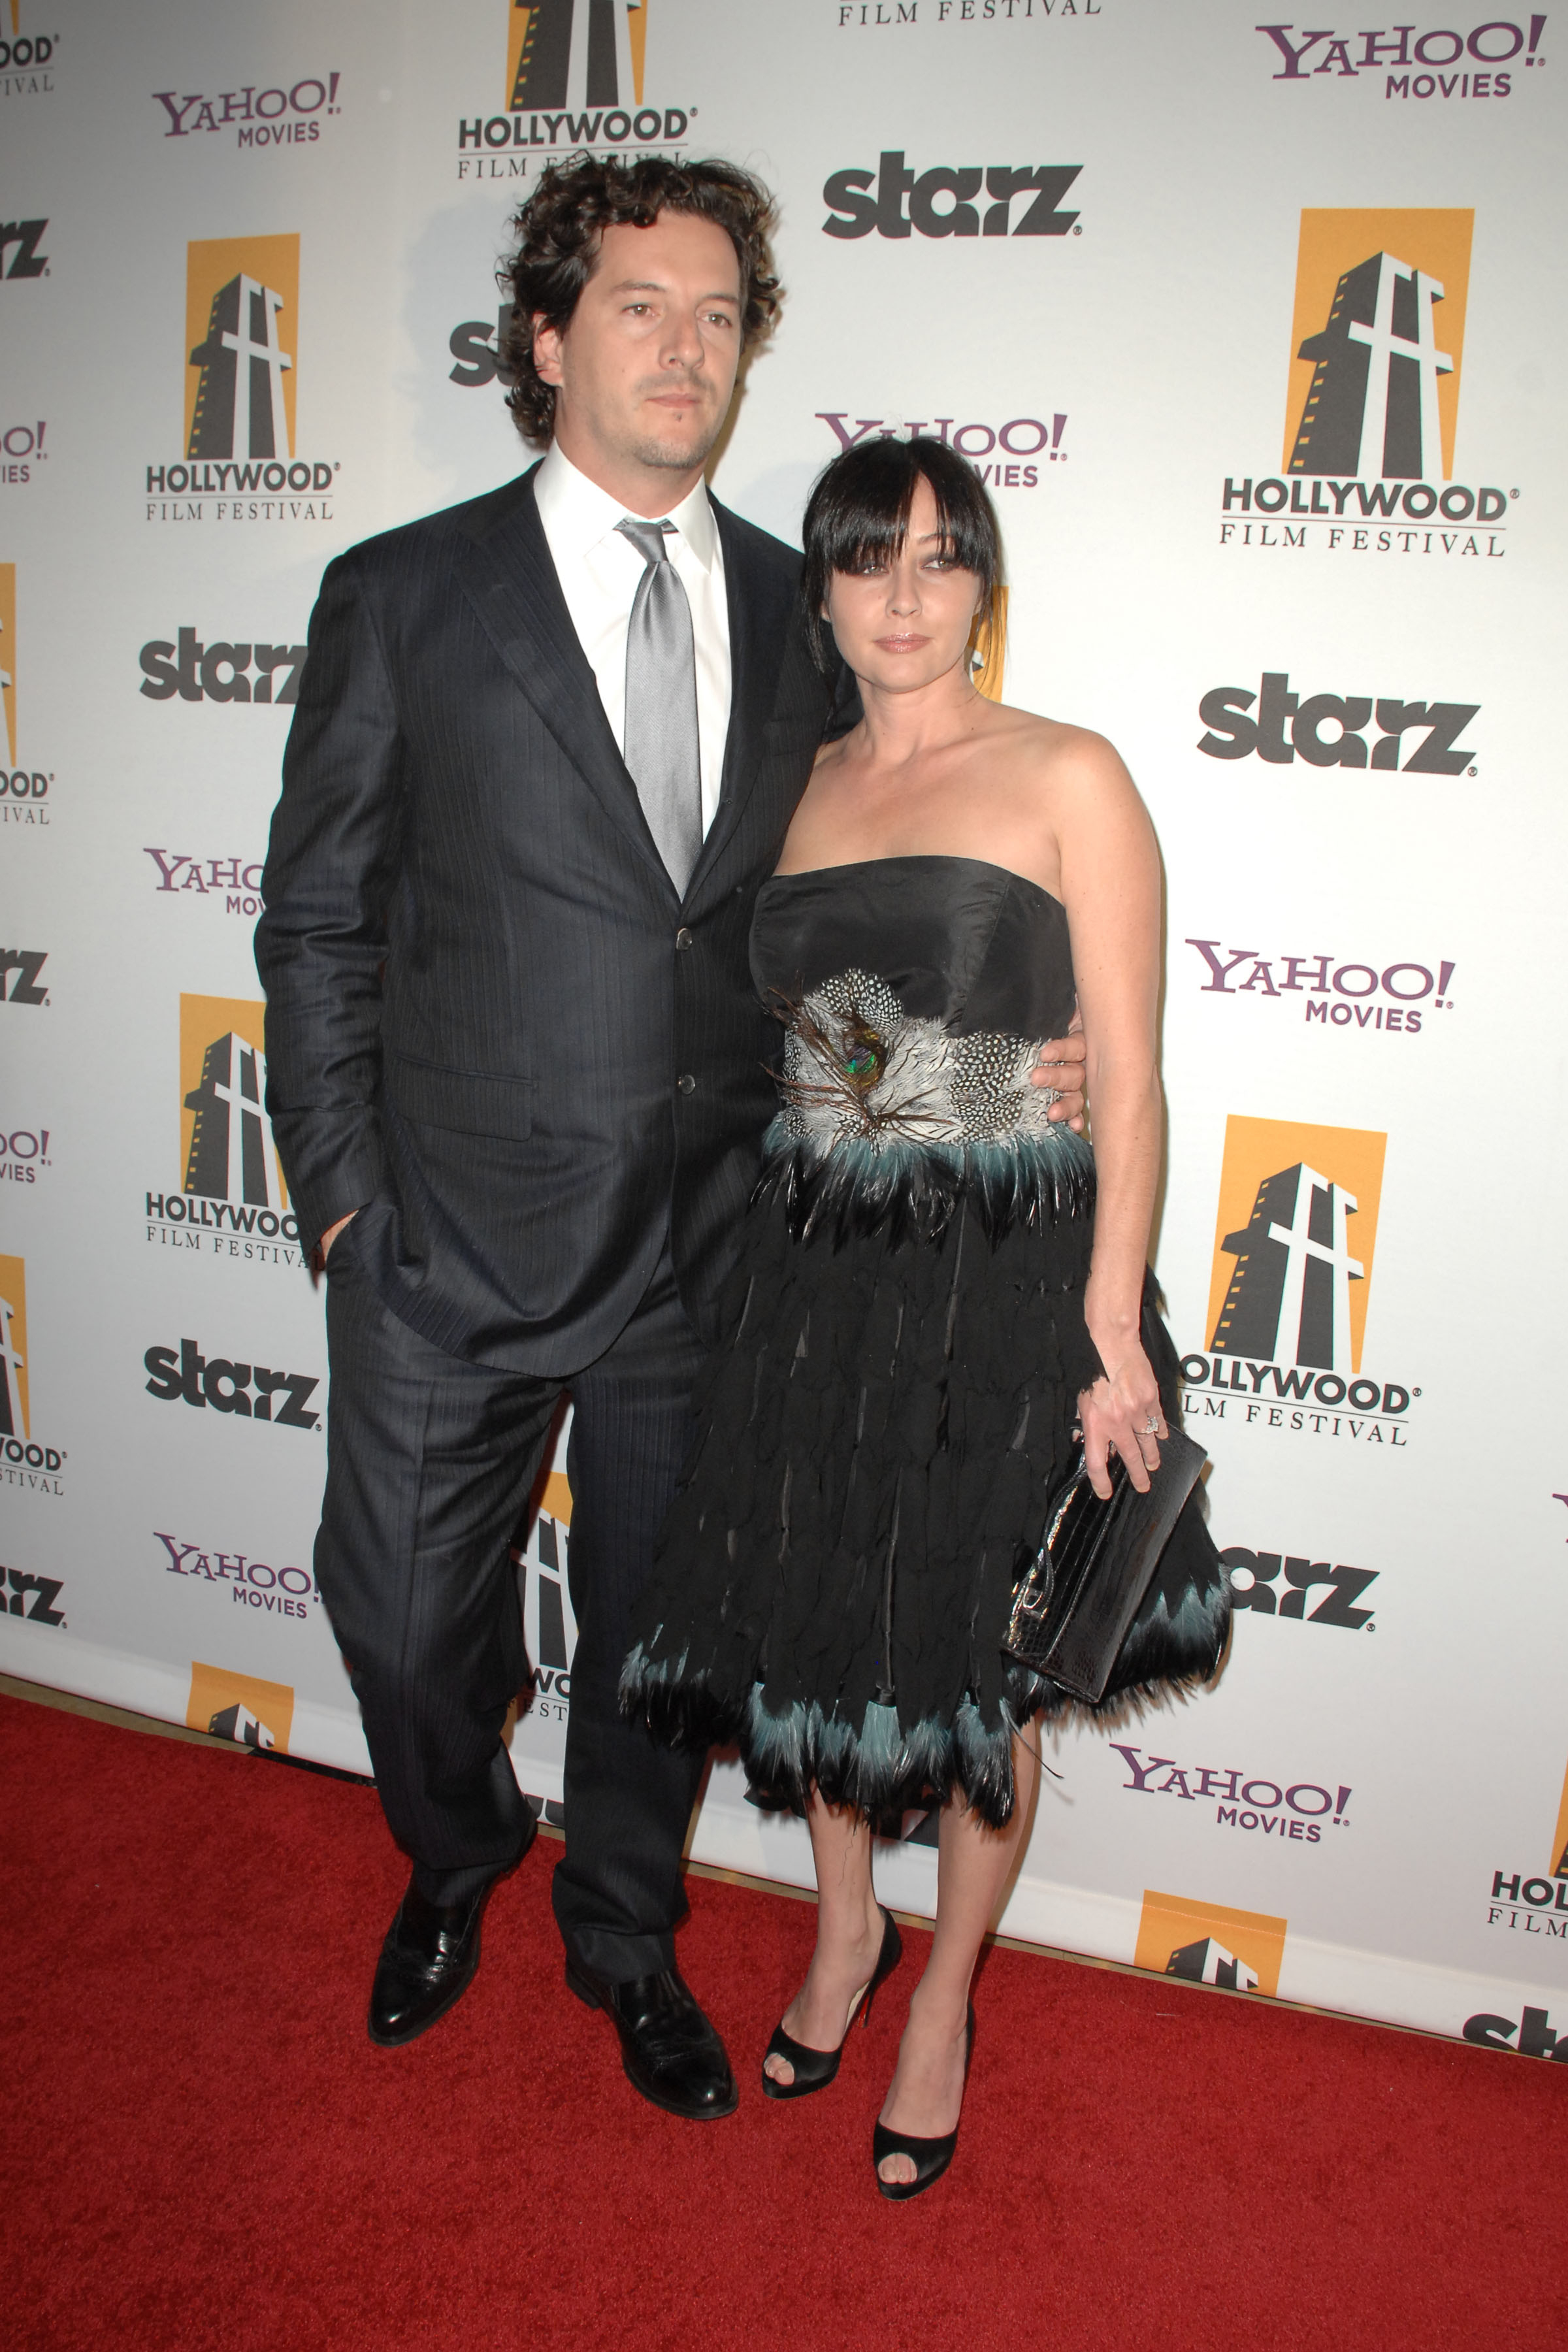 Kurt Iswarienko and Shannen Doherty attend Hollywood Fest Honors Today's Biggest Stars At The 13th Annual Hollywood Awards Gala Ceremony at Beverly Wilshire Hotel in Beverly Hills, California on October 26, 2009. | Source: Getty Images